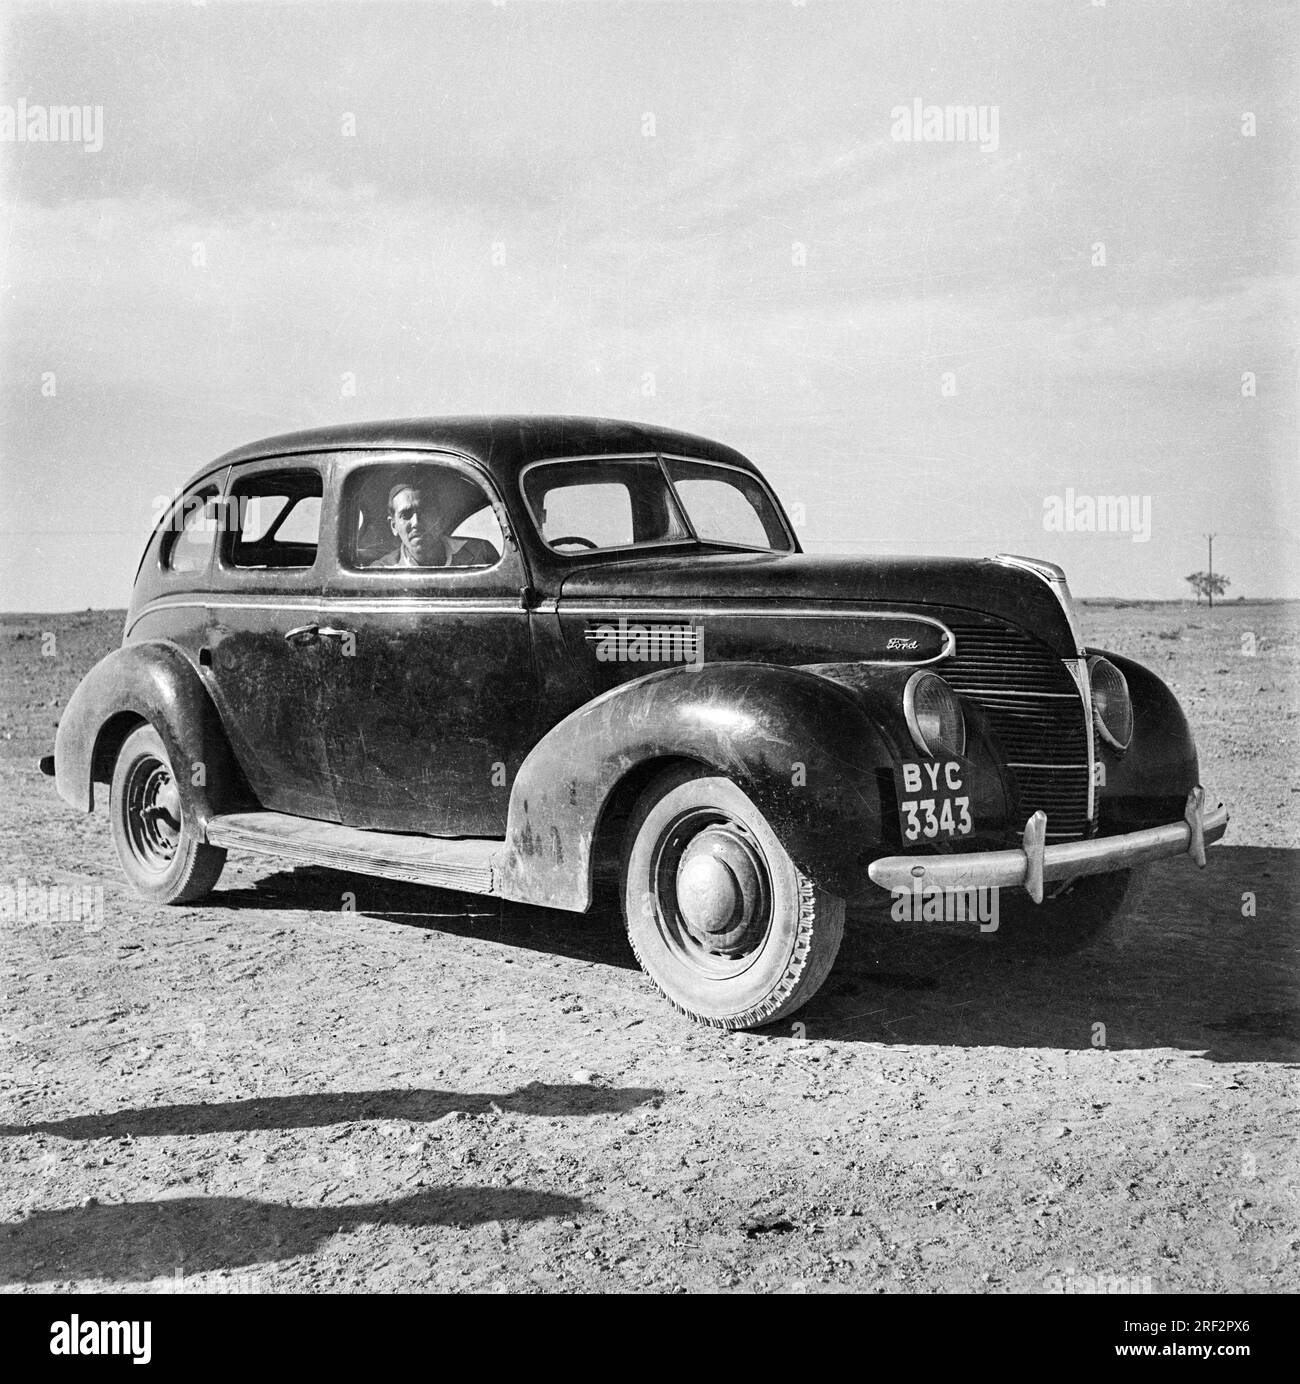 old vintage 1900s black and white picture of Ford Mercury 1938 car BYC 3343 India Stock Photo